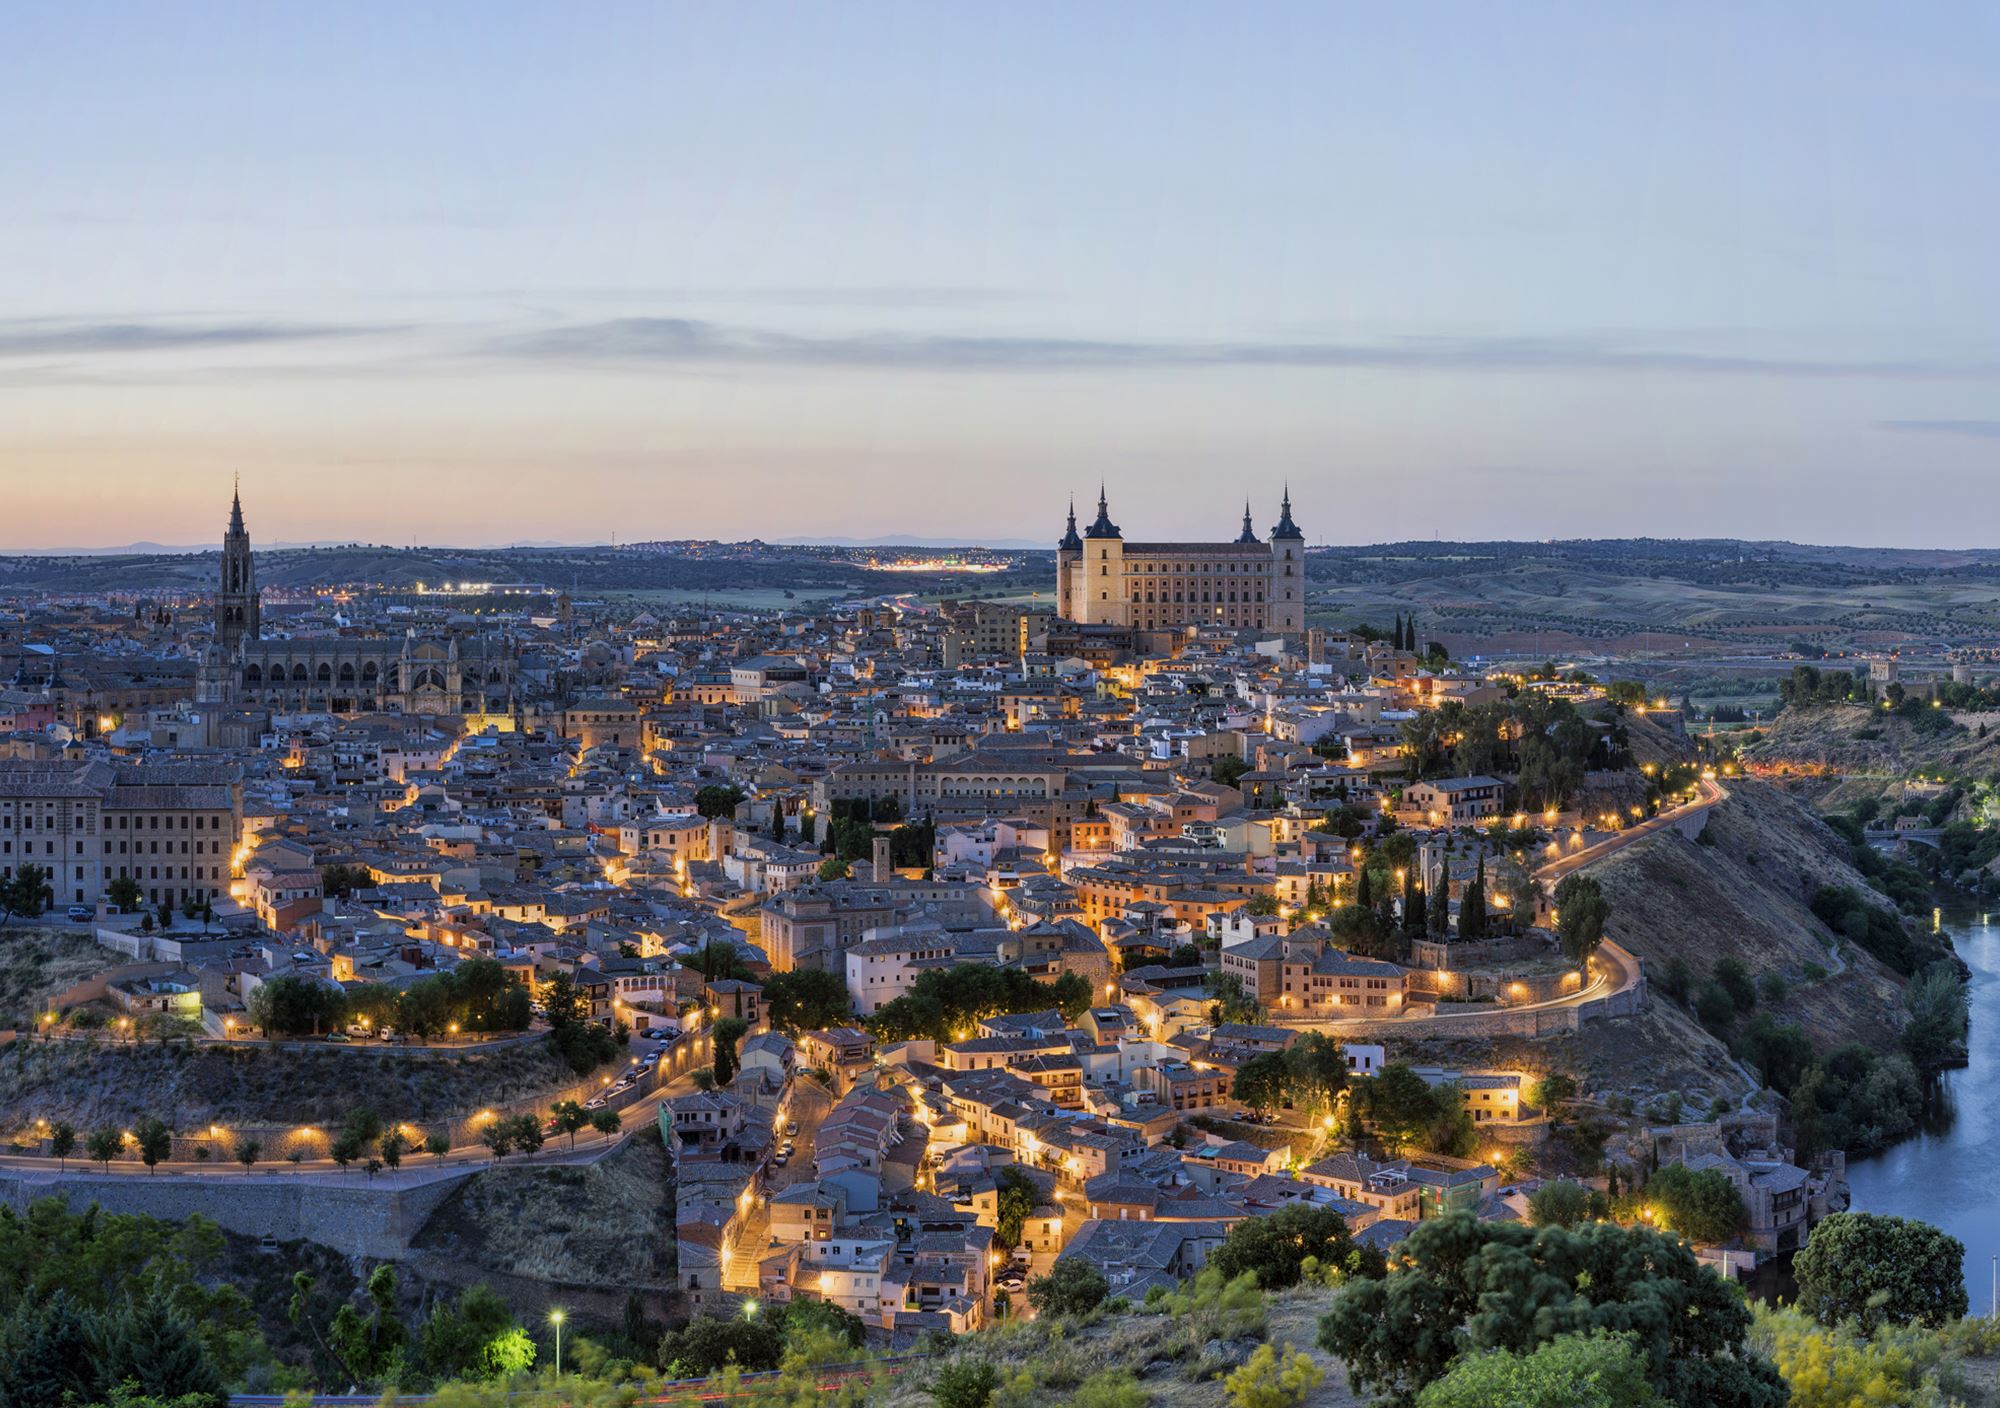 Excursions, trips, visits, attractions, tours and things to do in Toledo Spain